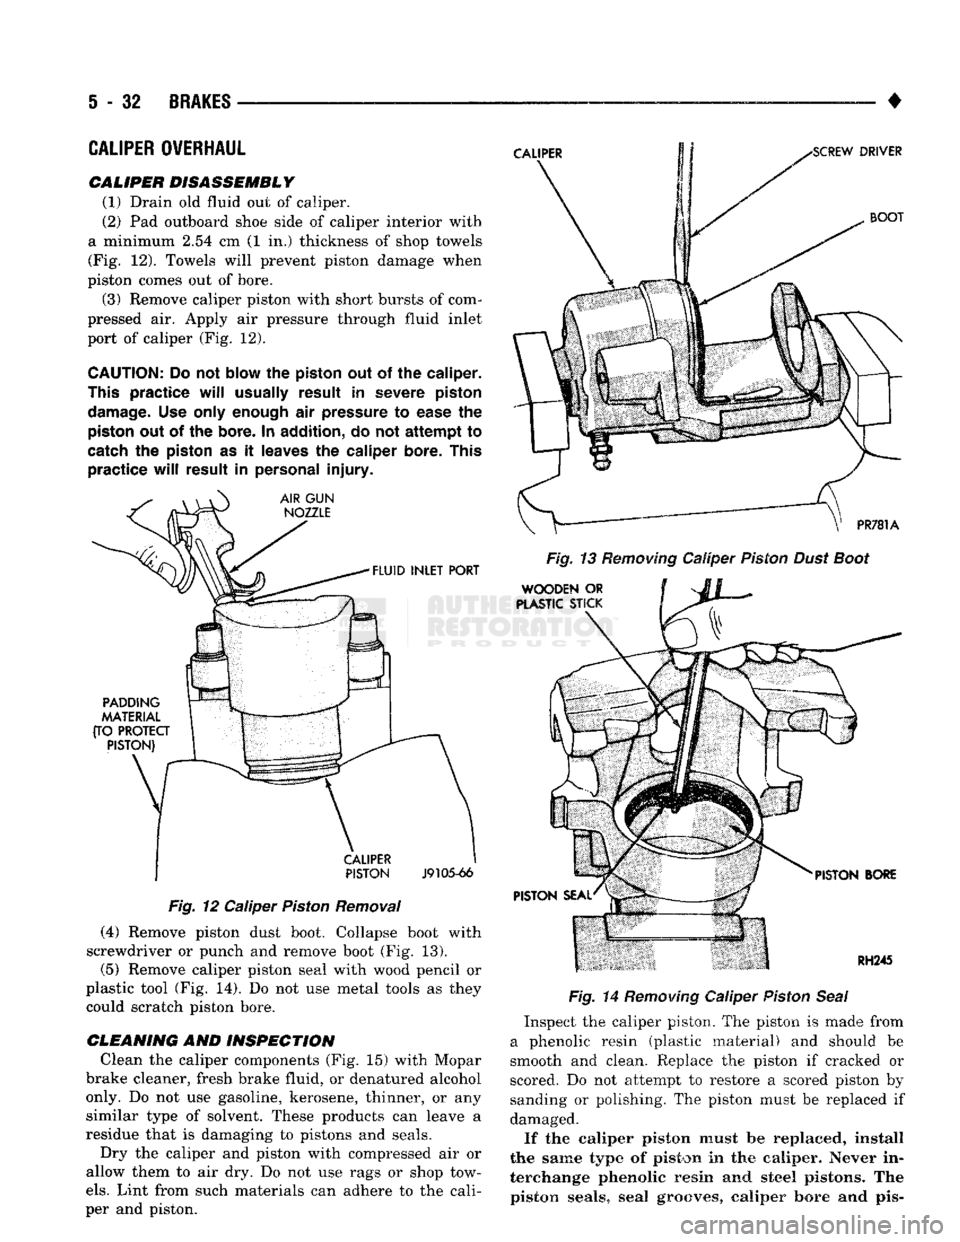 DODGE TRUCK 1993  Service Repair Manual 
5
 - 32
 BRAKES 

• 
CALIPER
 OVERHAUL 

CALIPER DISASSEMBLY  (1) Drain
 old
 fluid
 out of
 caliper. 
(2)
 Pad
 outboard shoe side
 of
 caliper interior with 
a minimum
 2.54 cm (1 in.)
 thickness